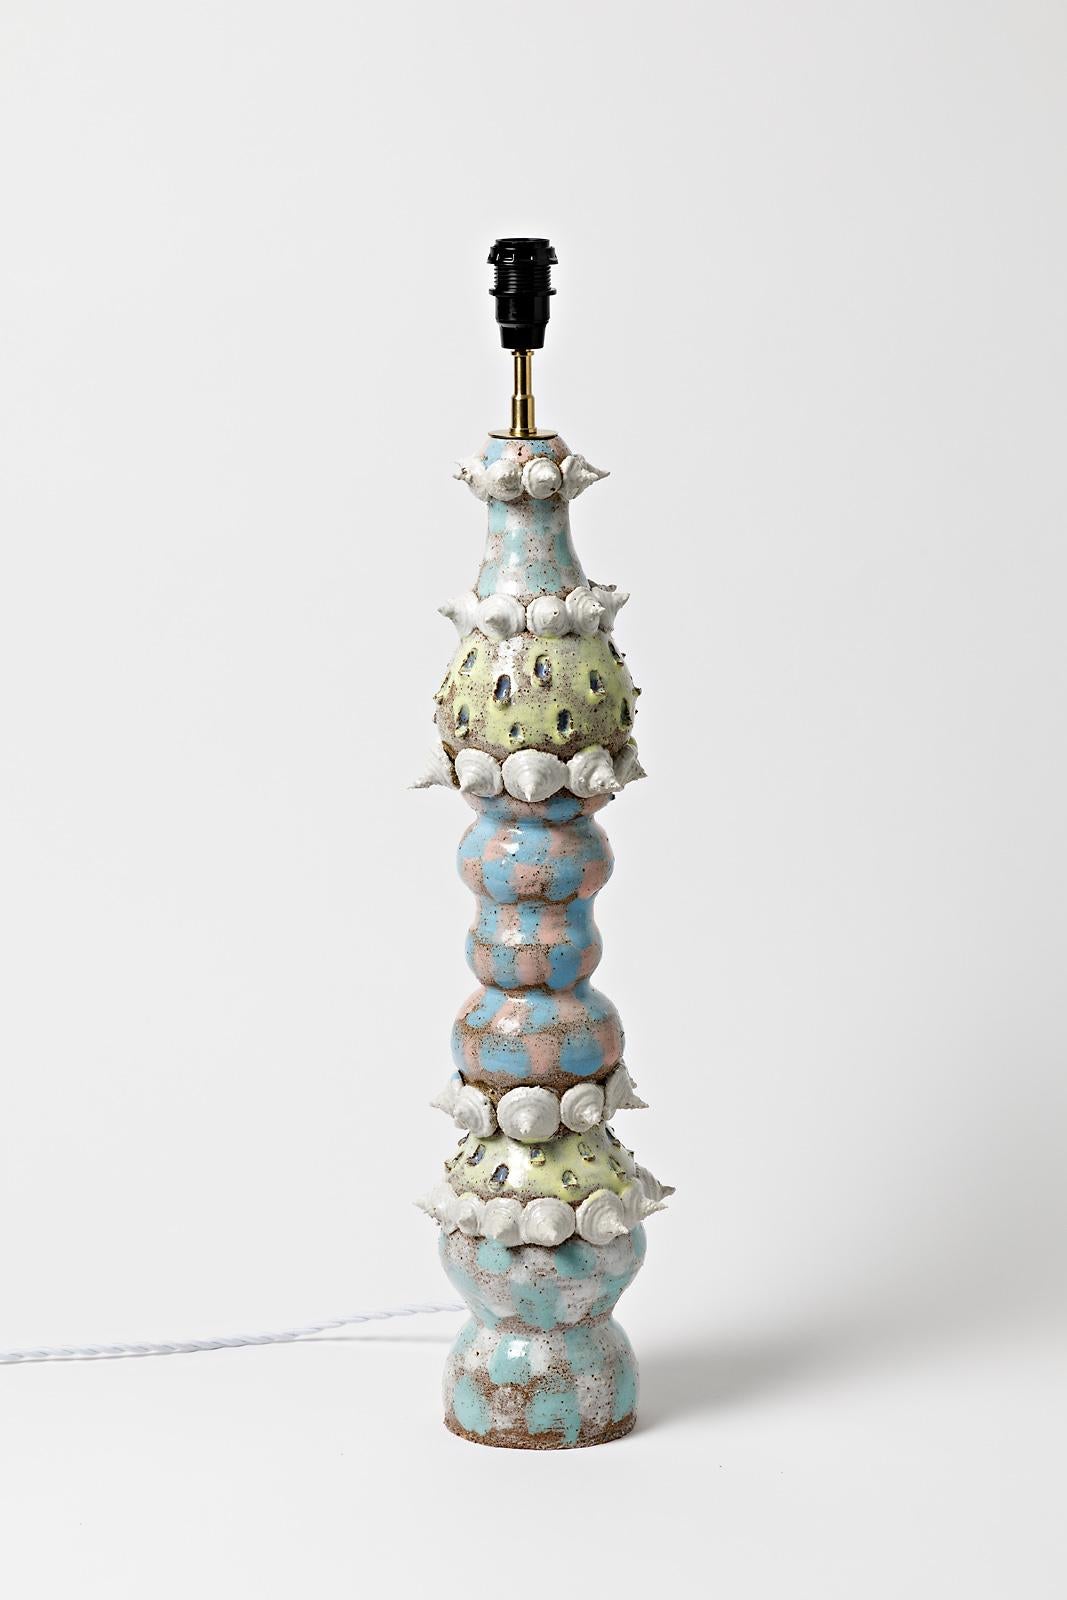 Mathilde Sauce

Unique piece, realised in 2021

Large stoneware ceramic table lamp

Blue, white and yellow ceramic glazes colors

Electrical system is new

Signed under the base

Ceramic measures - height : 51 cm Large : 14 cm
Measures